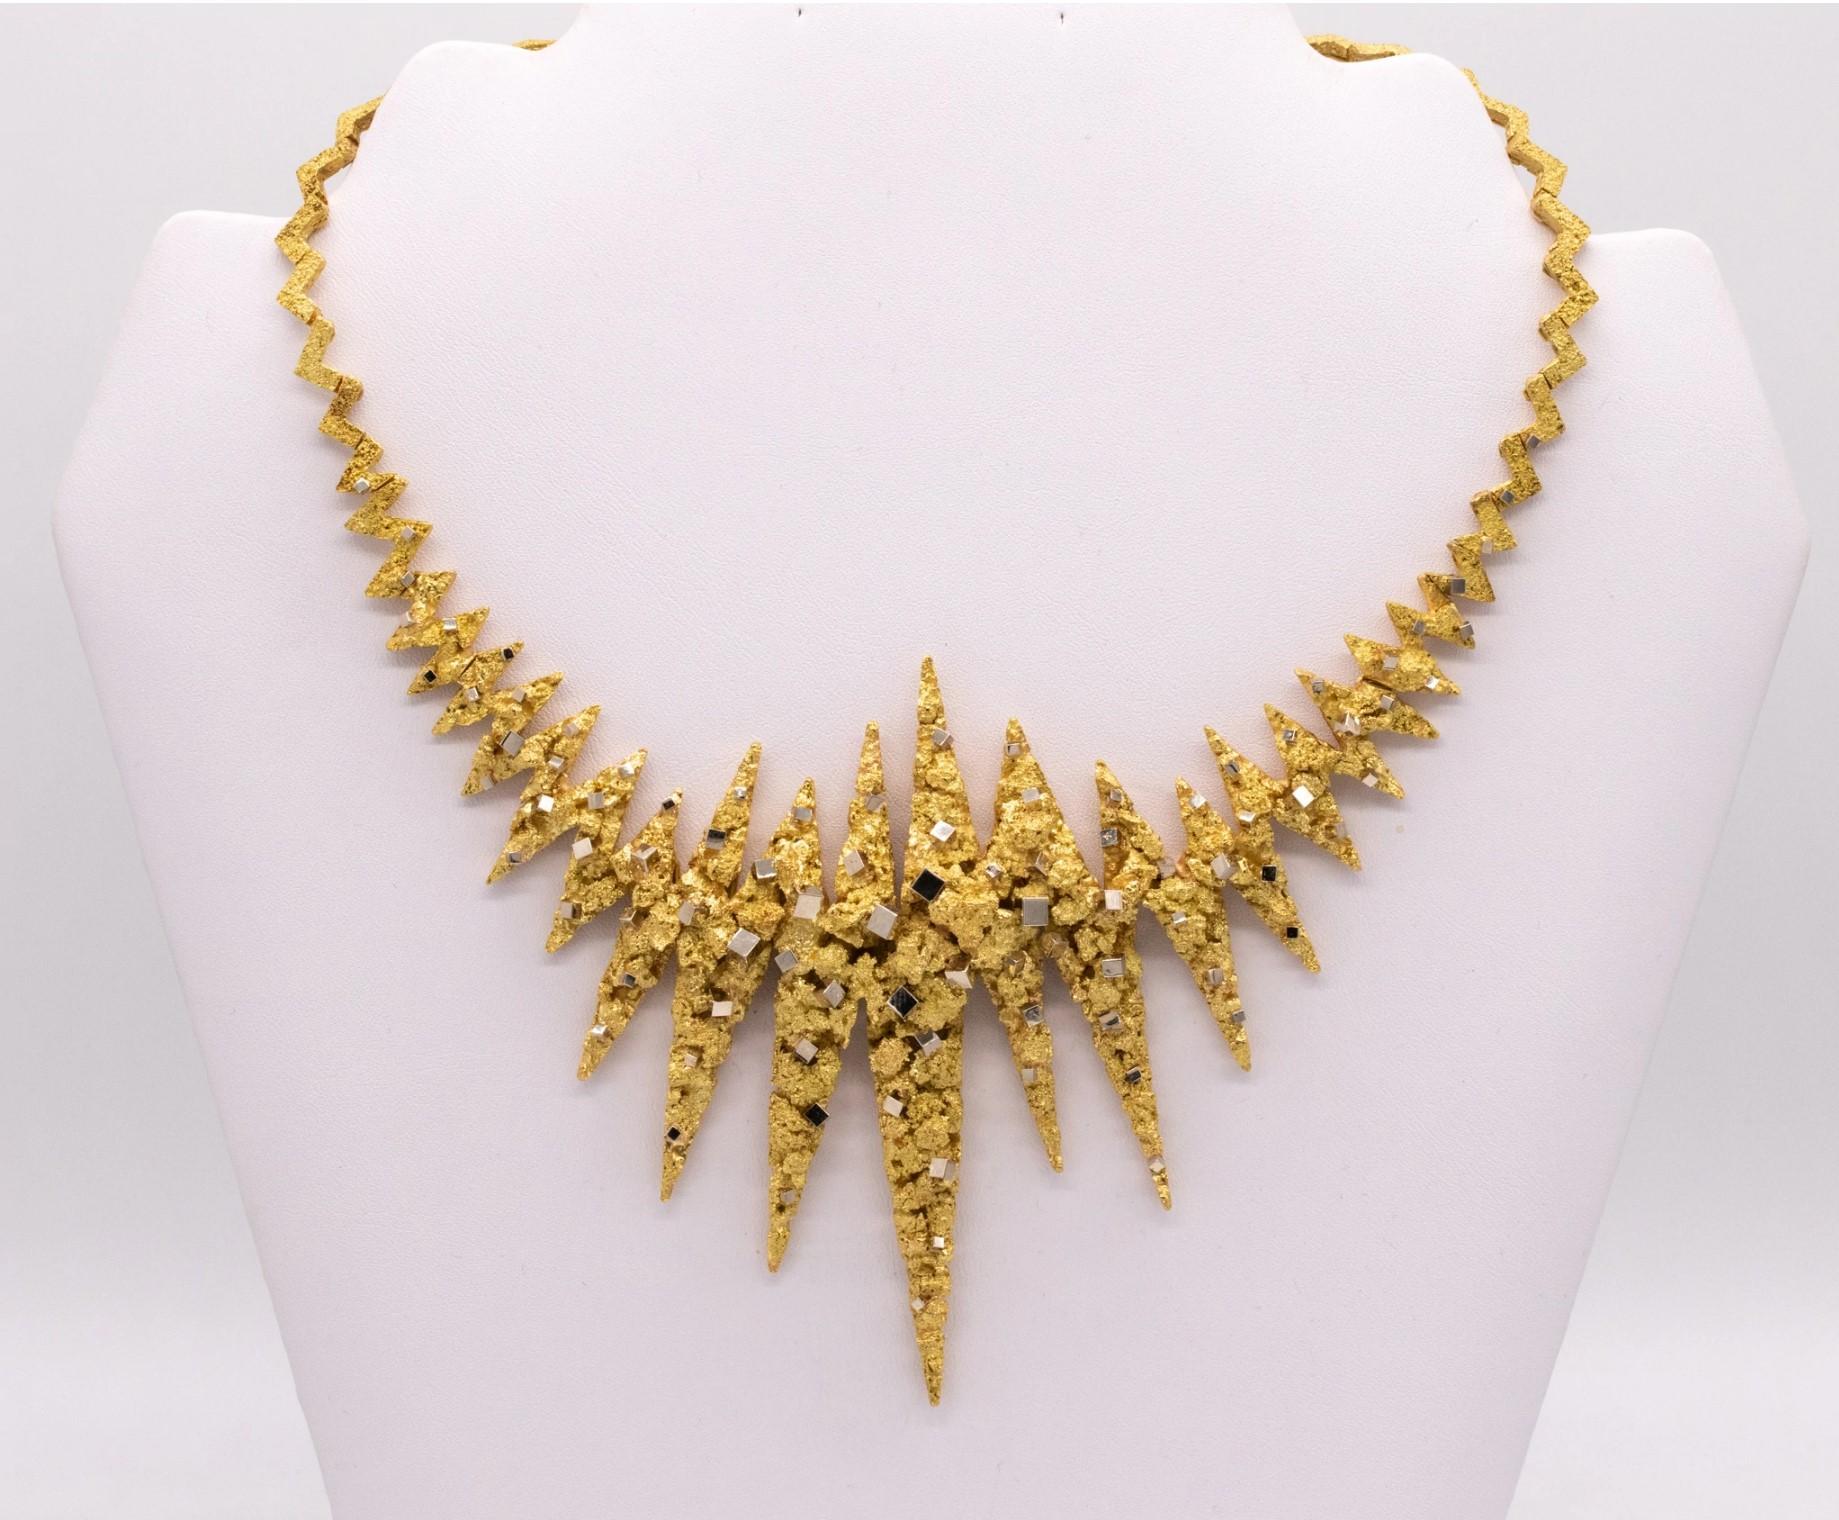 Gay Freres 1950 Paris-Geneva 1950 Retro Stardust Explosion Necklace in 18Kt Gold In Excellent Condition For Sale In Miami, FL